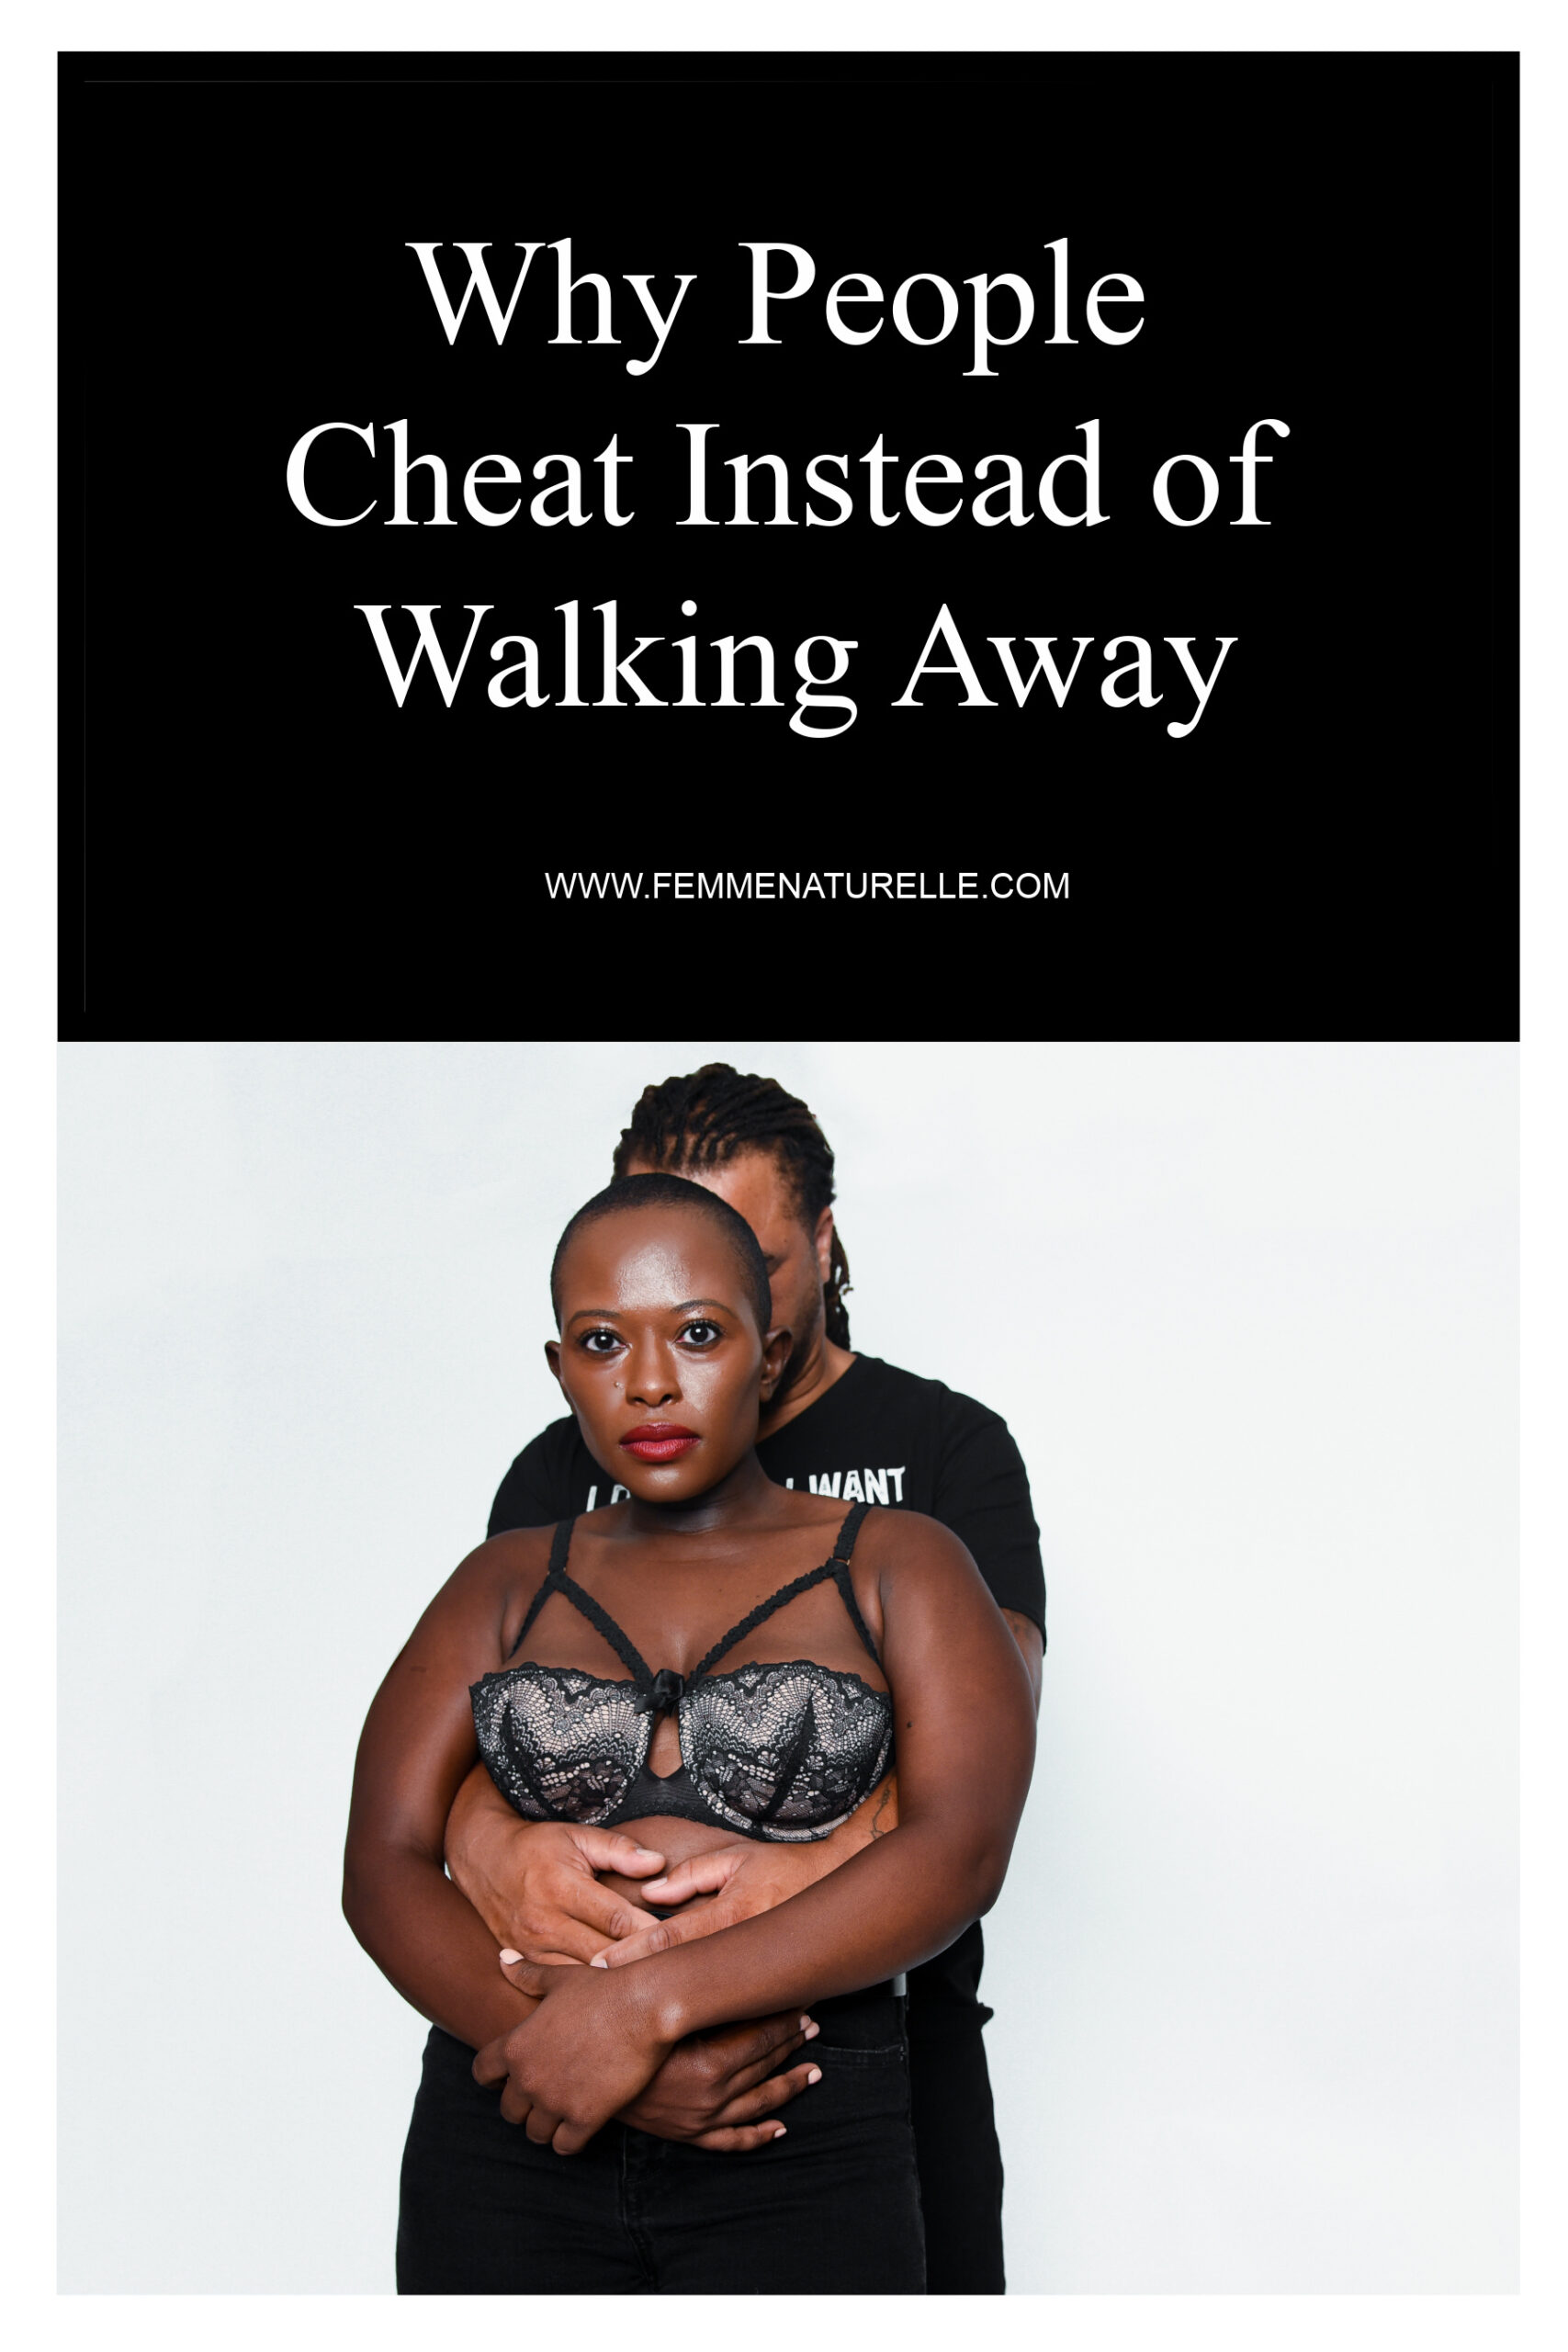 Why People Cheat Instead of Walking Away